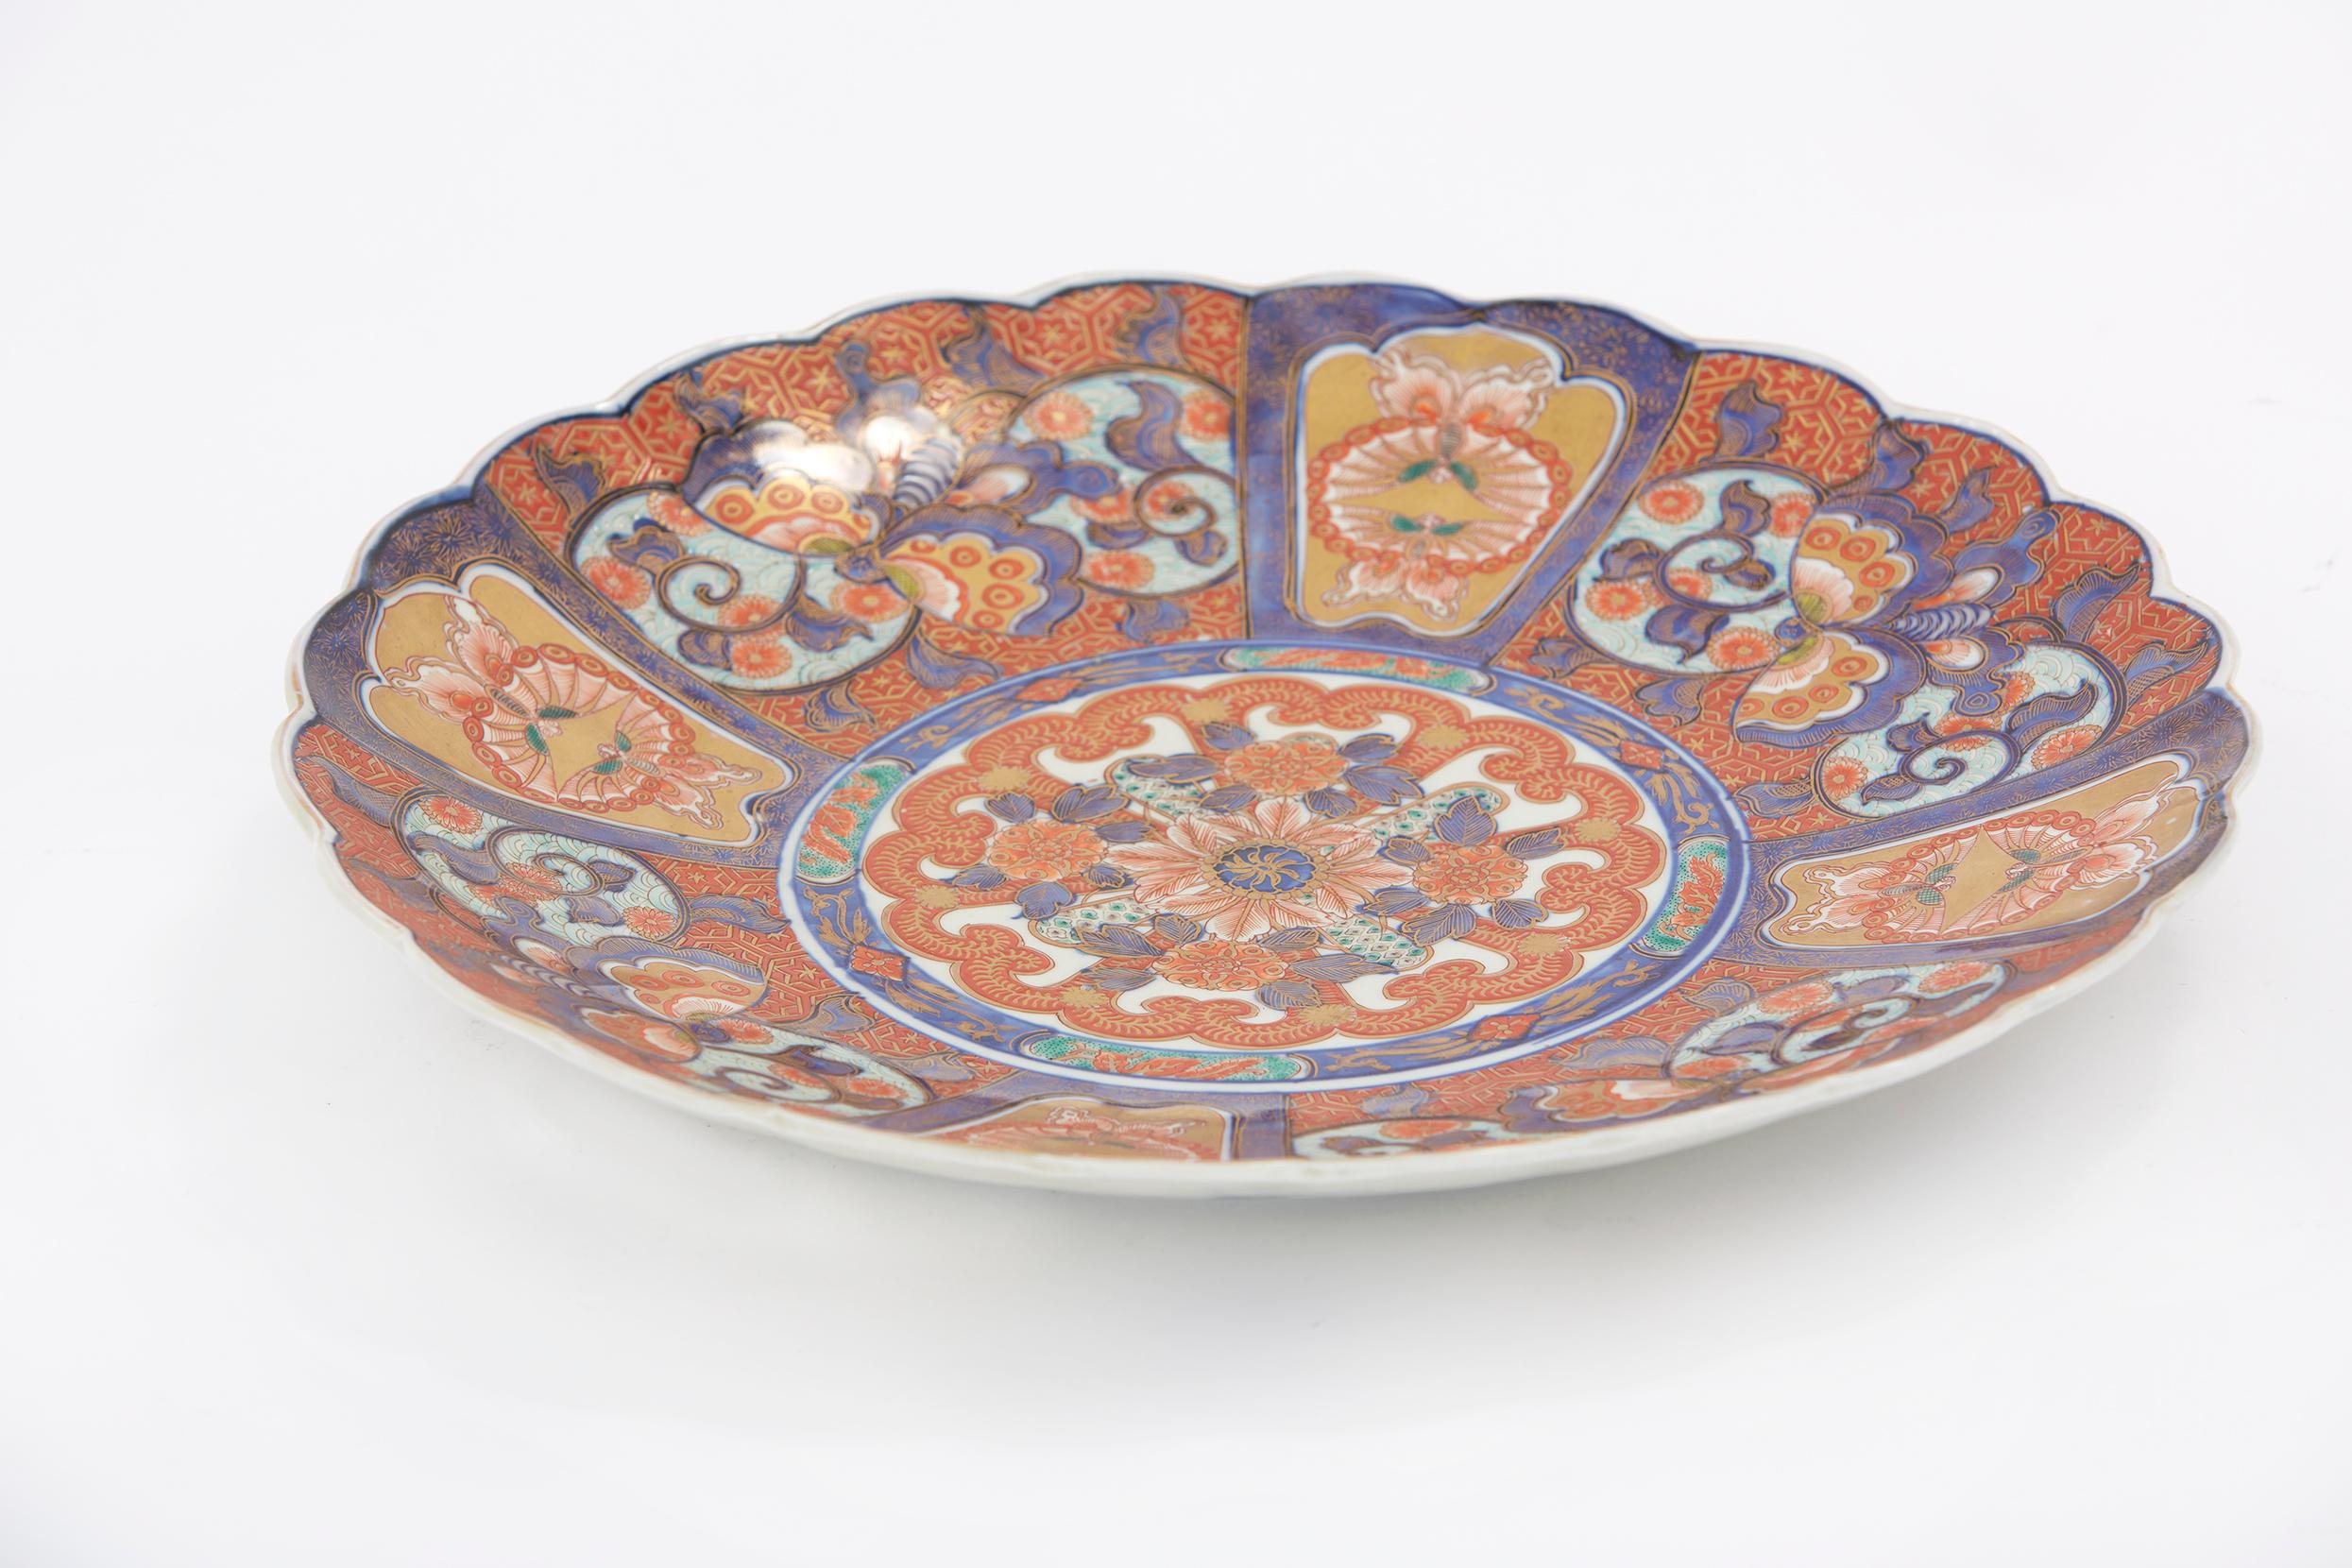 Large hanging wall decoration / centerpiece, Imari porcelain import charger. The Asian ceramic platter features hand painted floral decor with gold gilt accents. The charger is in excellent condition and it is highly embellished with finely